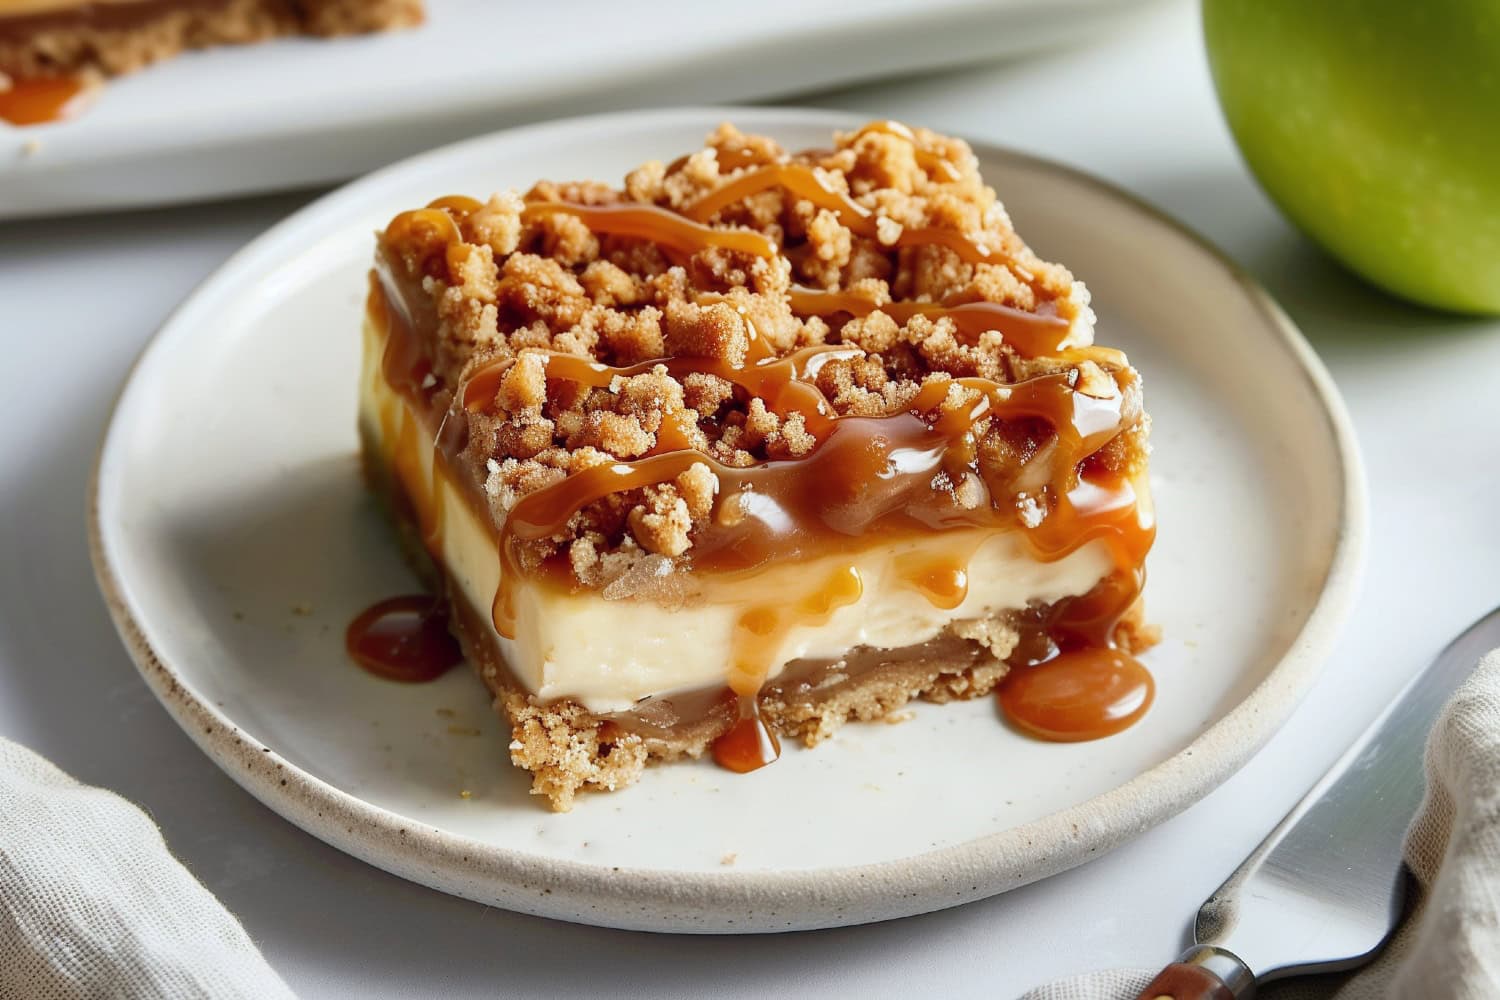 A plate of caramel apple cheesecake bar topped with streusel crumbs and drizzled with caramel sauce.